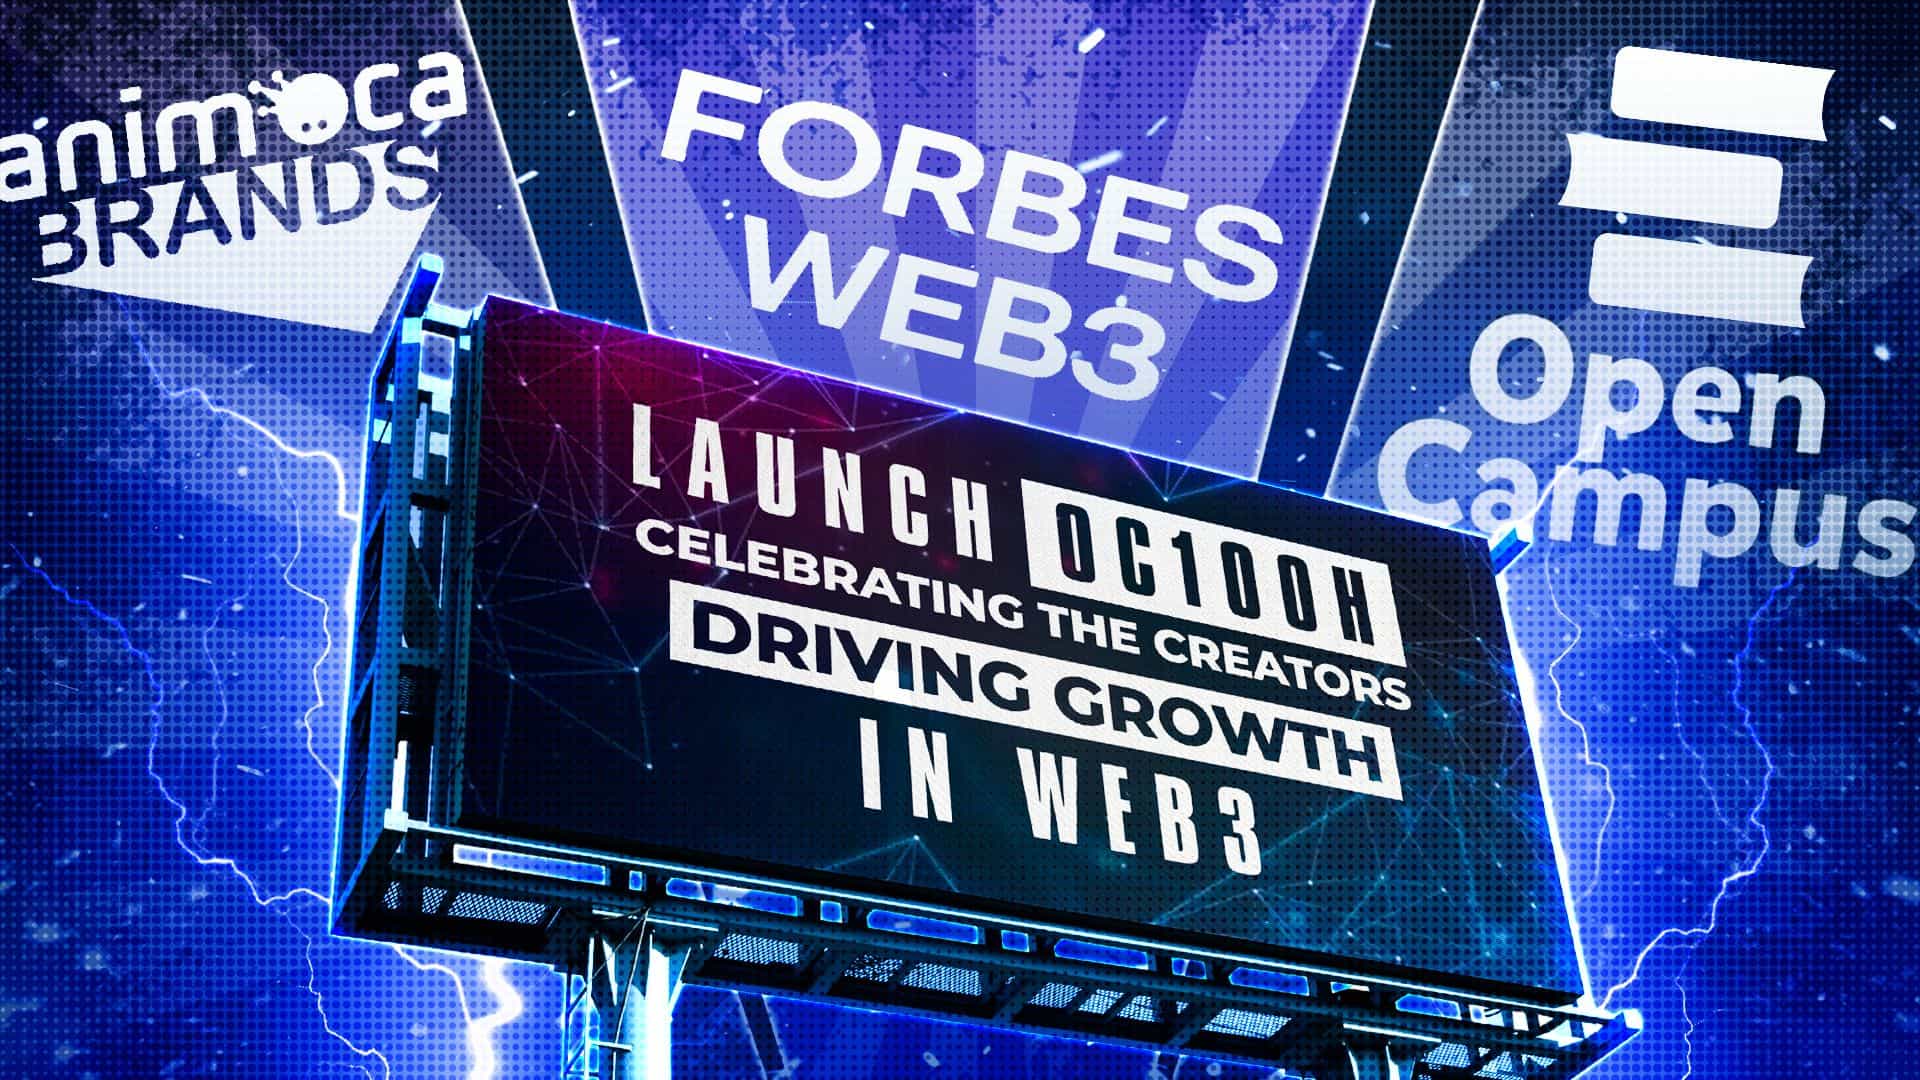 Open Campus, ForbesWeb3, and Animoca Brands Launch OC100, the Definitive List of Creators Driving Learning and Growth Within Web3